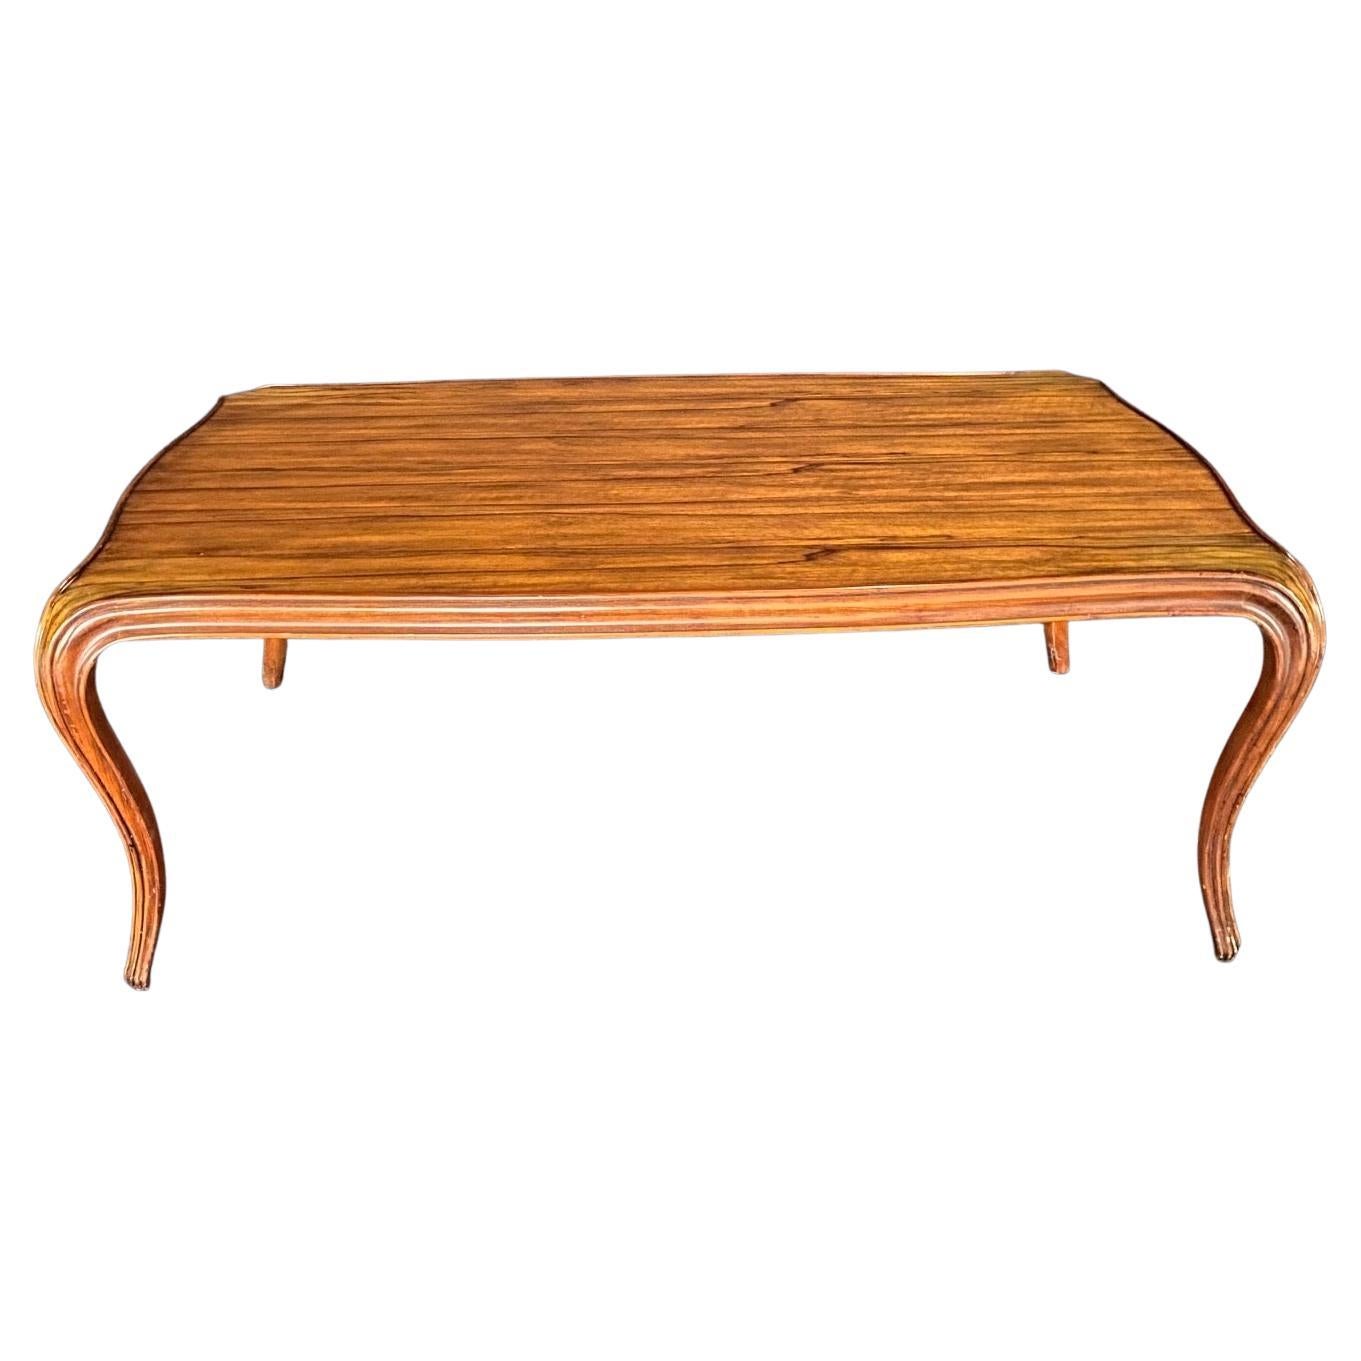 Elegant Mid-Century Modern Curved Coffee Table by Keno Bros. For Sale